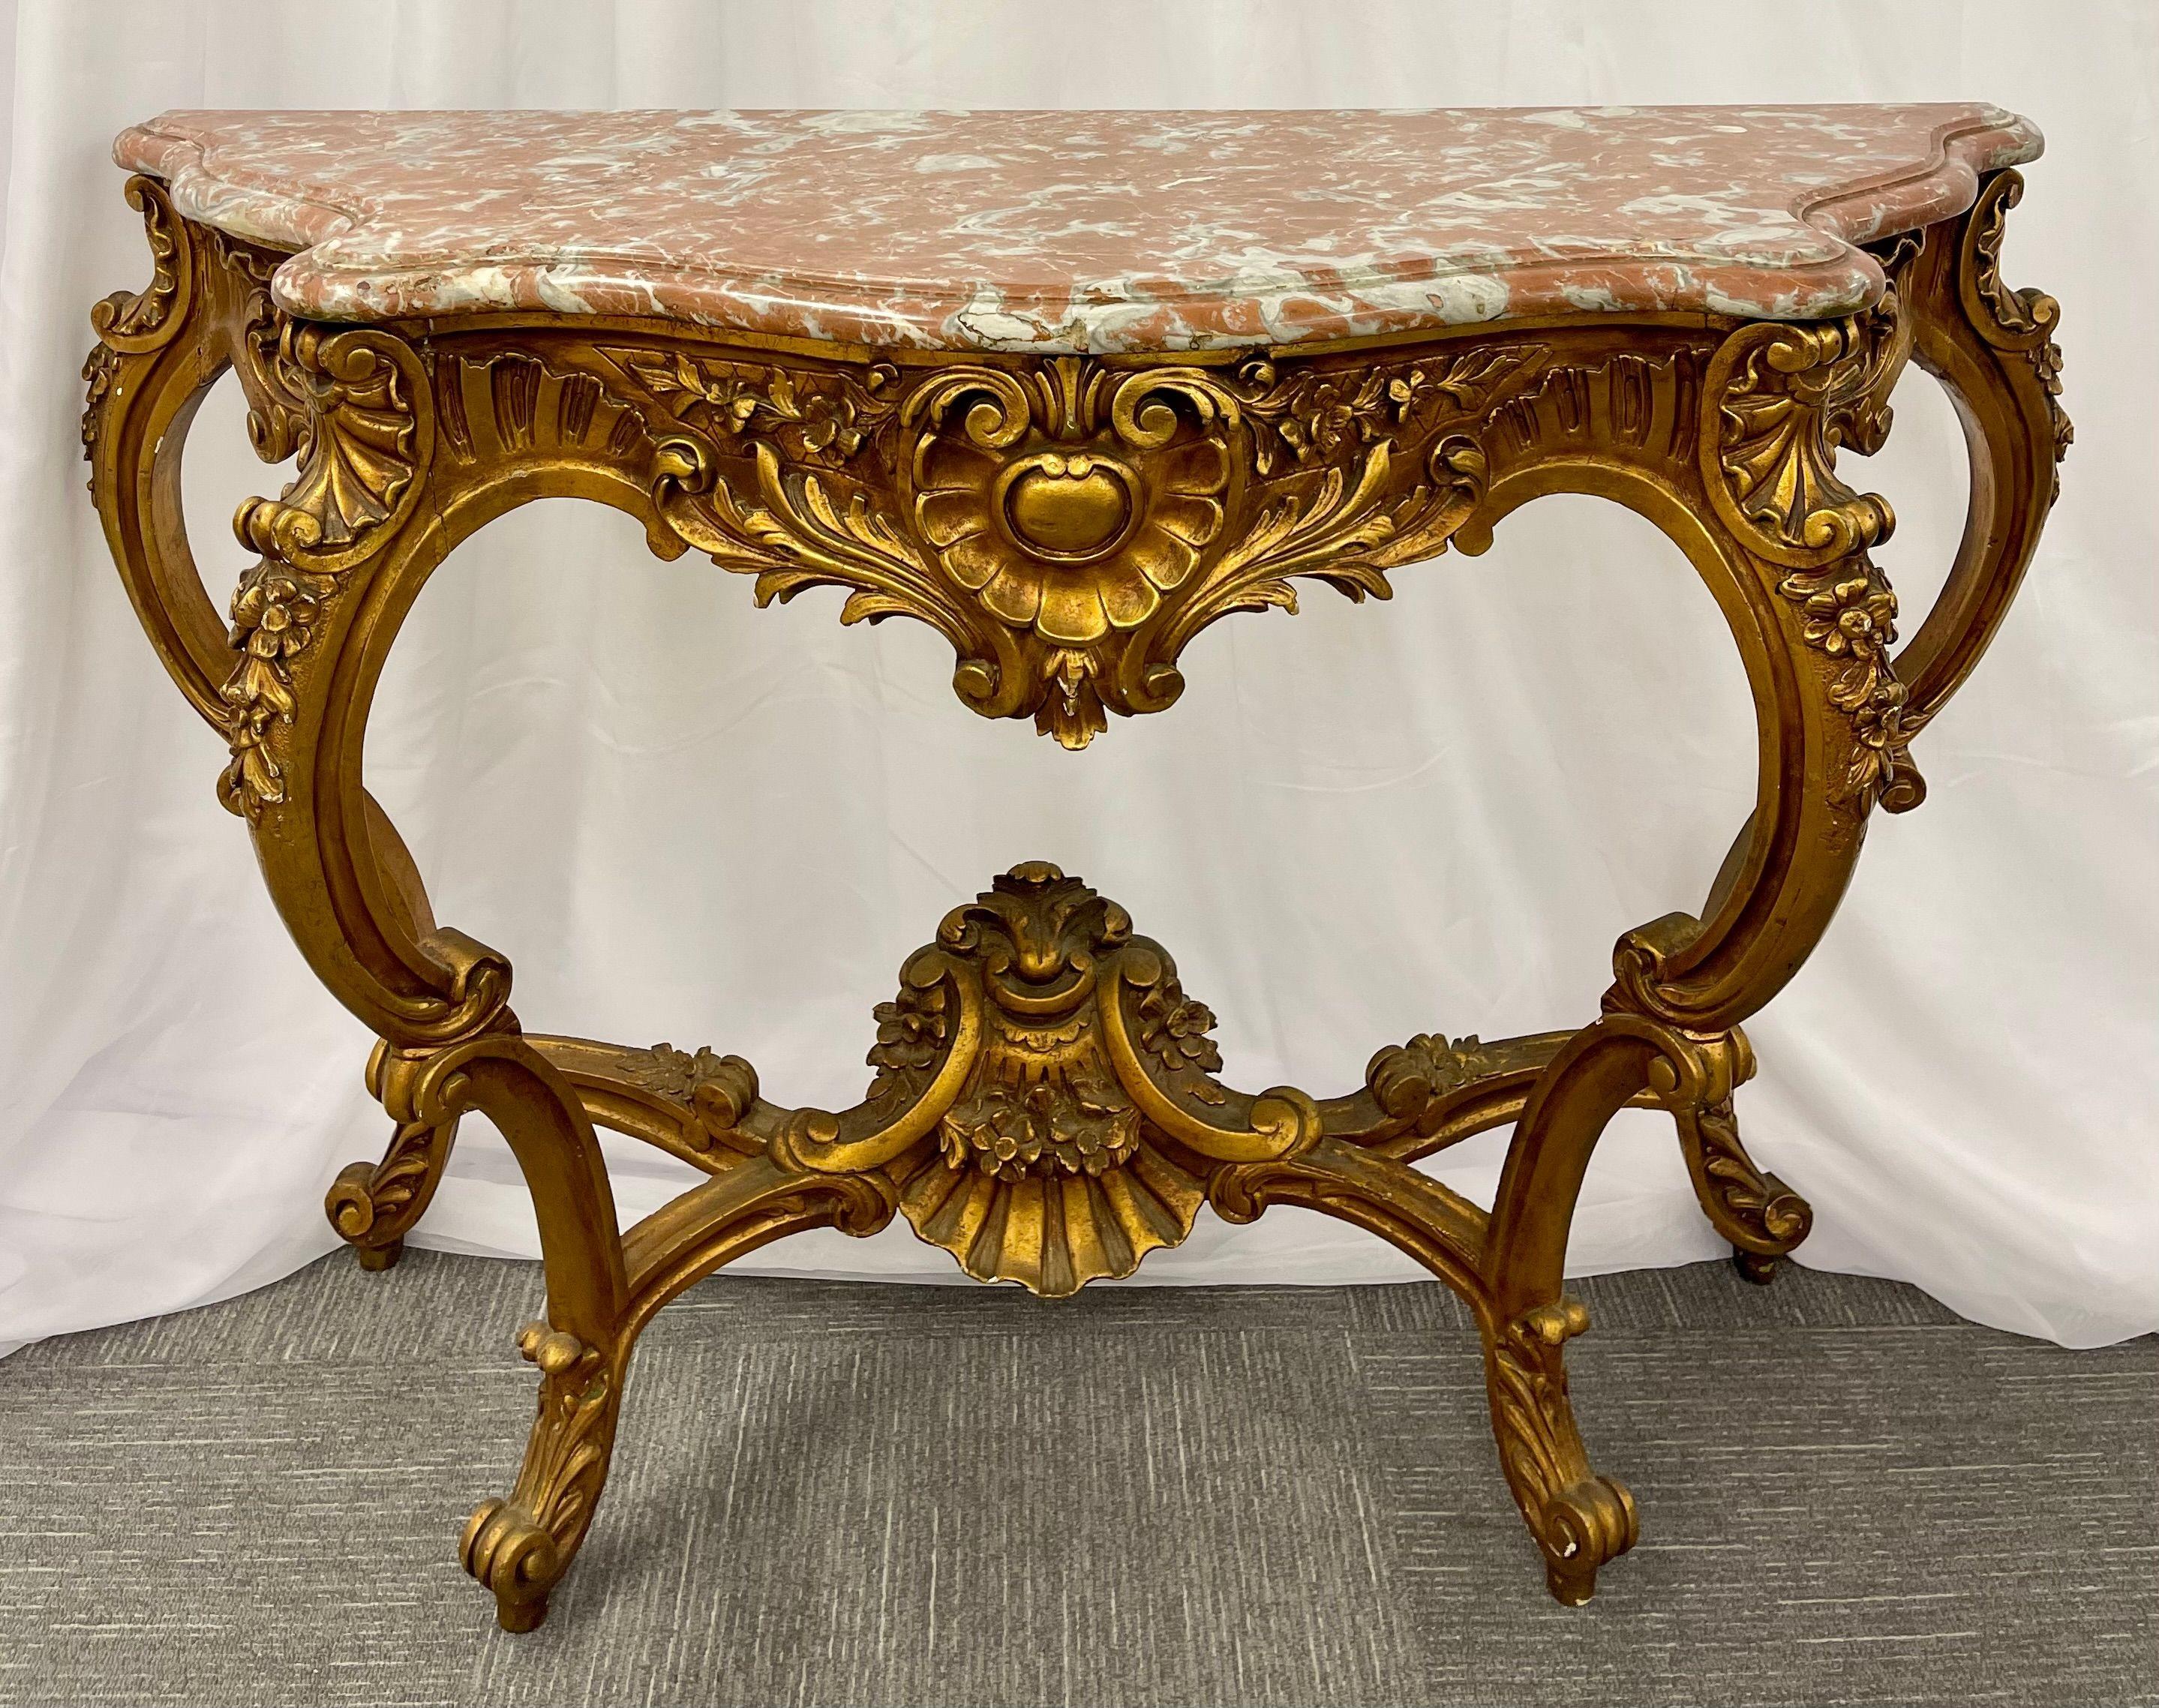 Marble-Top Louis XV Style Console Table by Jansen Exquisite Carved Details 1920s In Good Condition For Sale In Stamford, CT